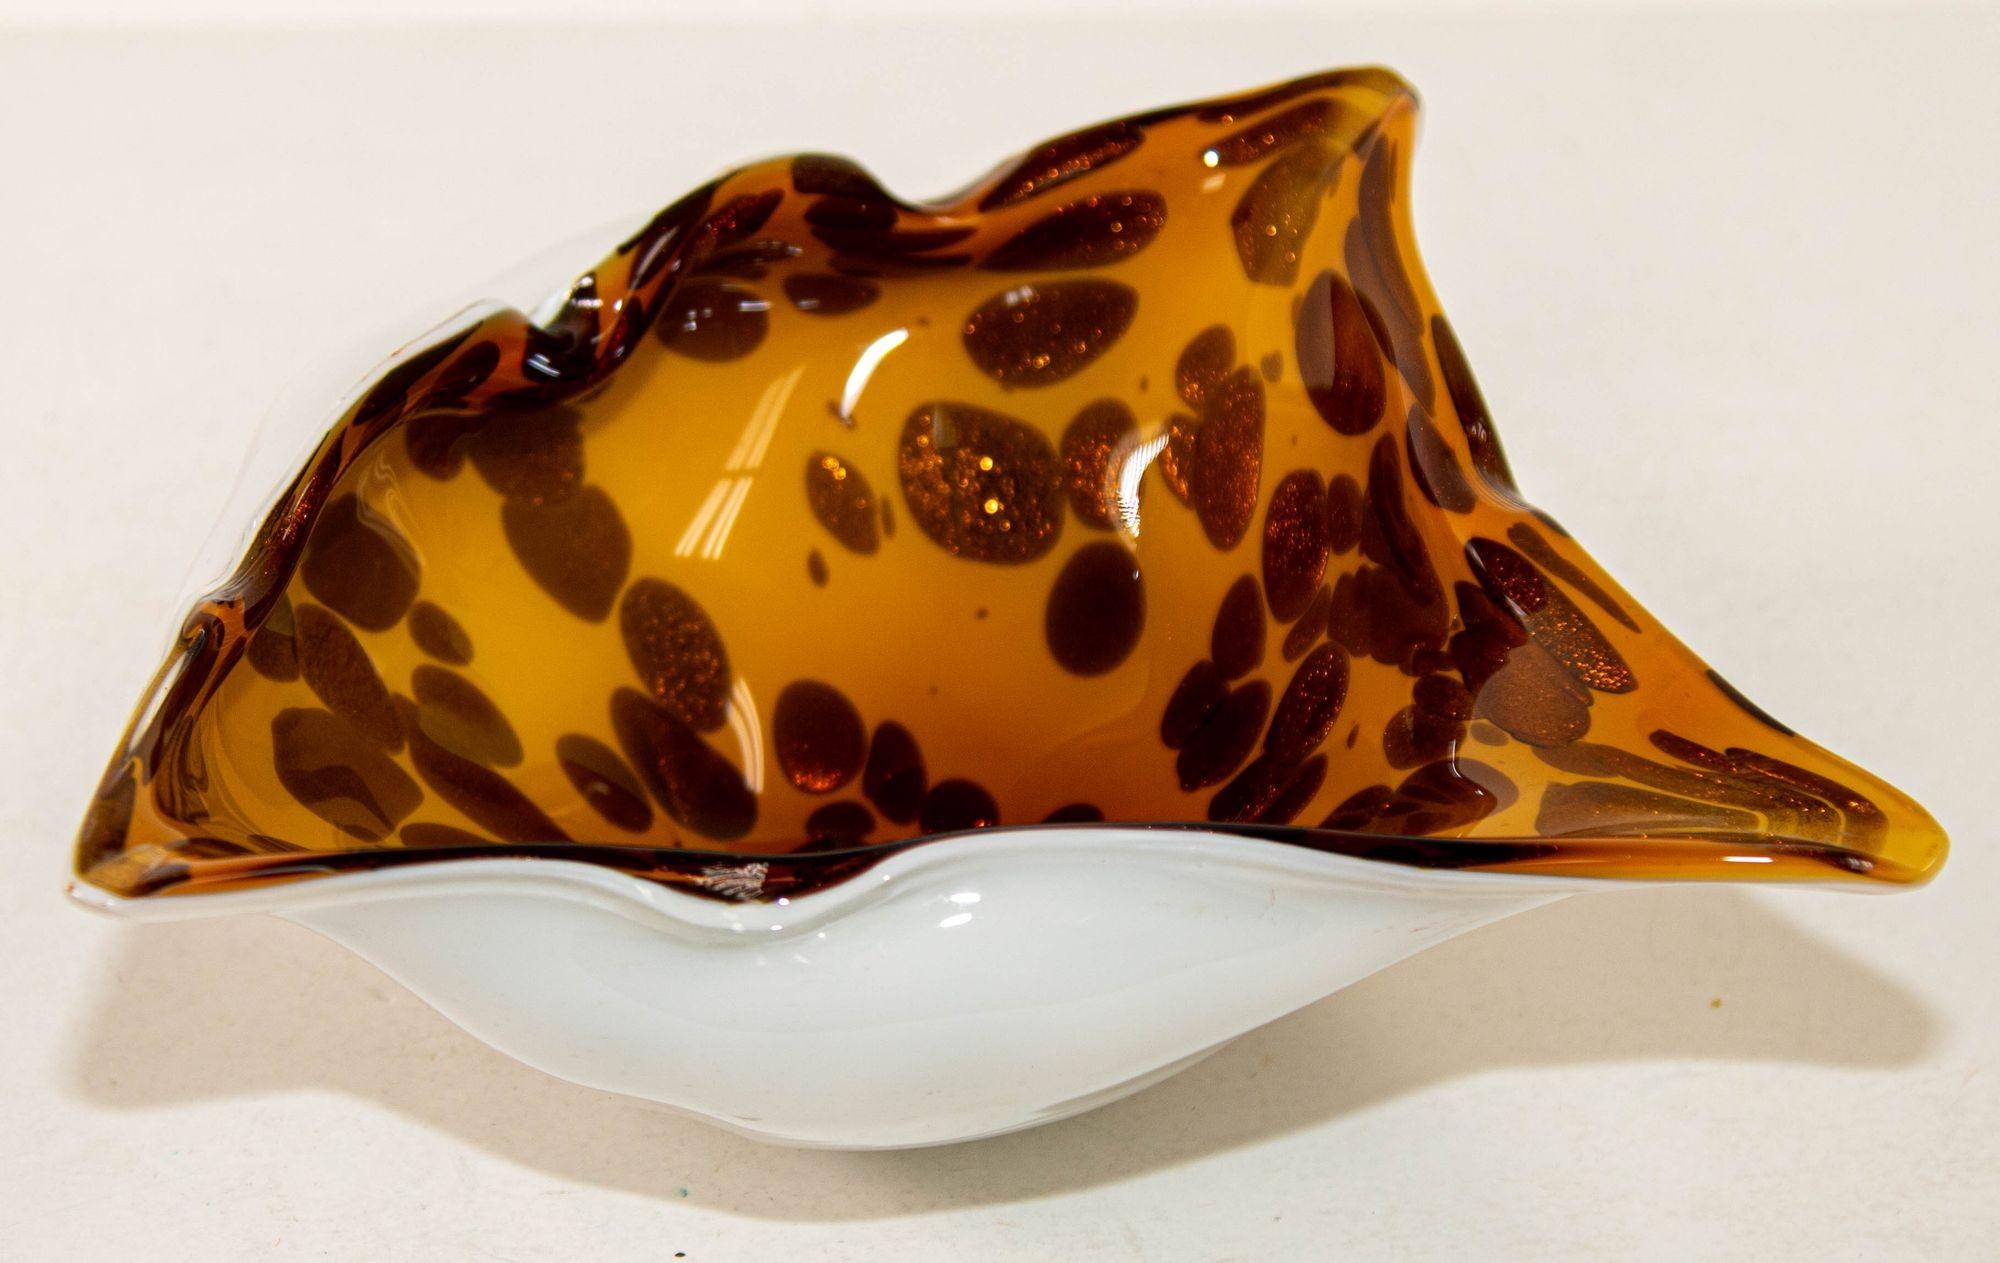 Murano Art Glass Manta Ray Tortoise Spotted Bowl Ashtray Vintage 1960s For Sale 5